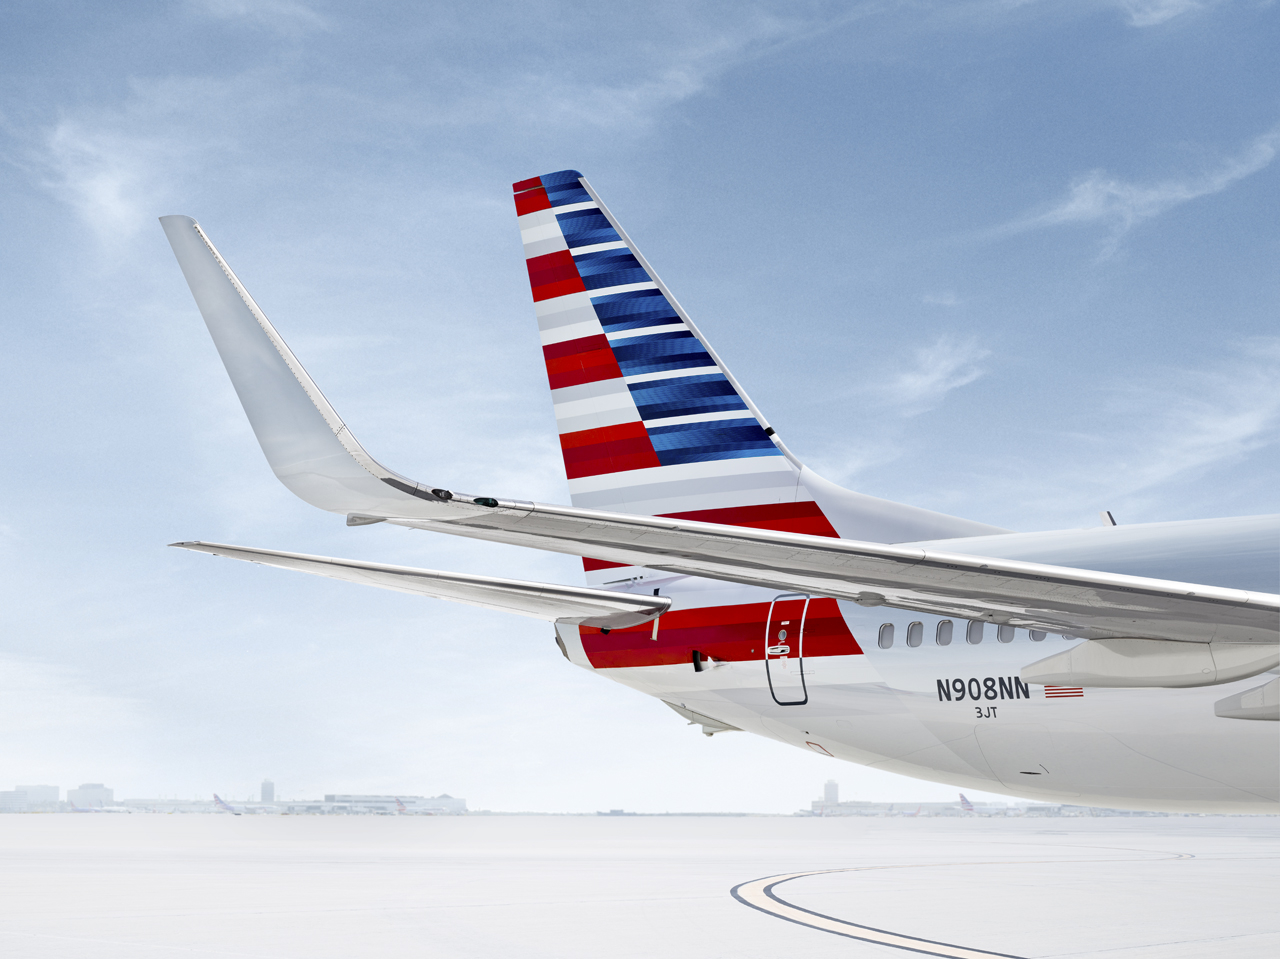 Get free flights on American Airlines flights by earning miles on the Citi AAdvantage Platinum Select credit card.